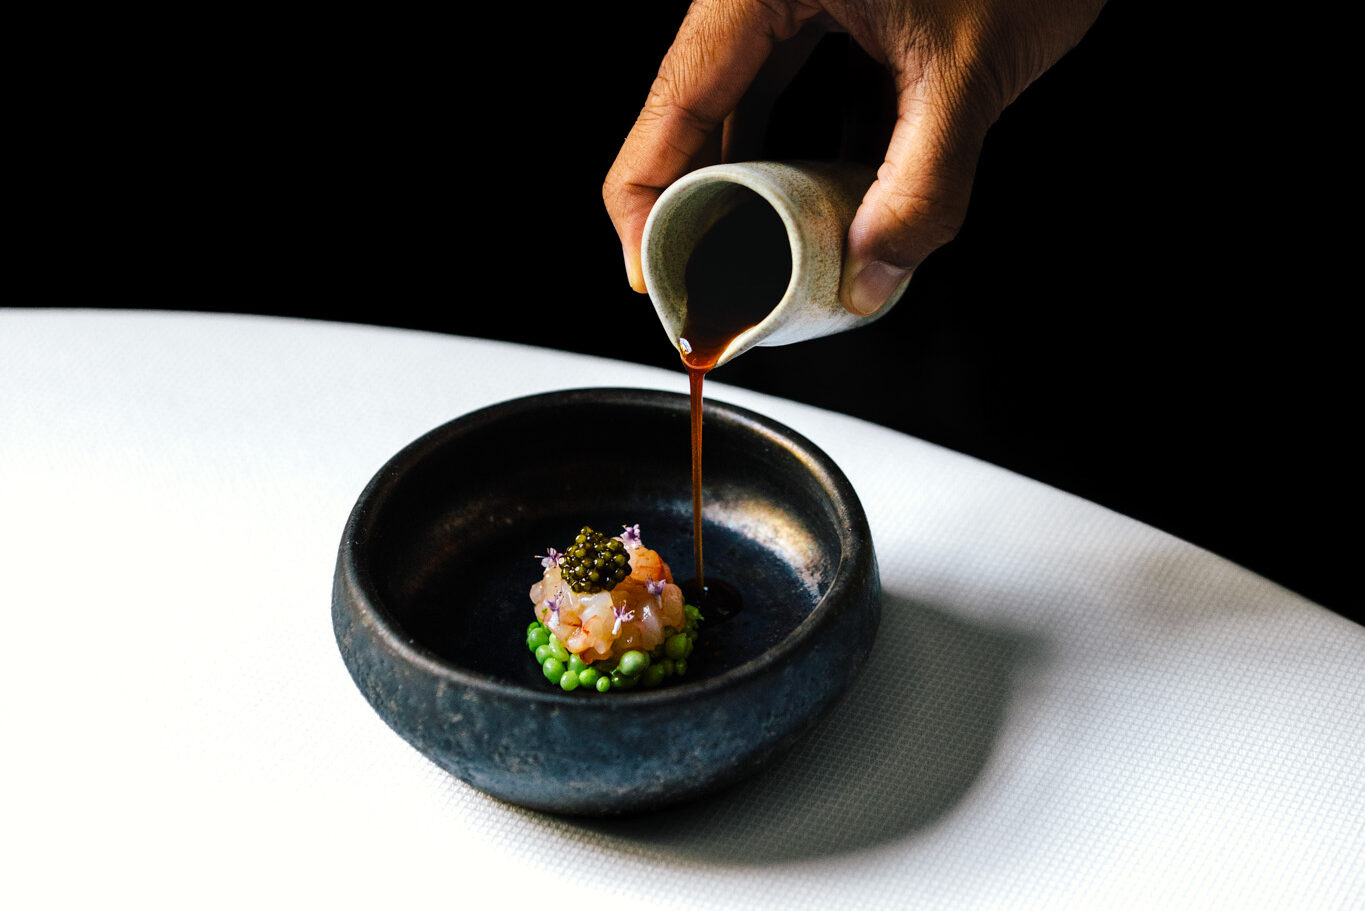 Teardrop pea dish with carabiniero Gamba Roja at Restaurant Vinkeles which is awarded 2 michelin stars at luxury boutique hotel The Dylan Amsterdam, part of the Leading hotels of The World (LHW)